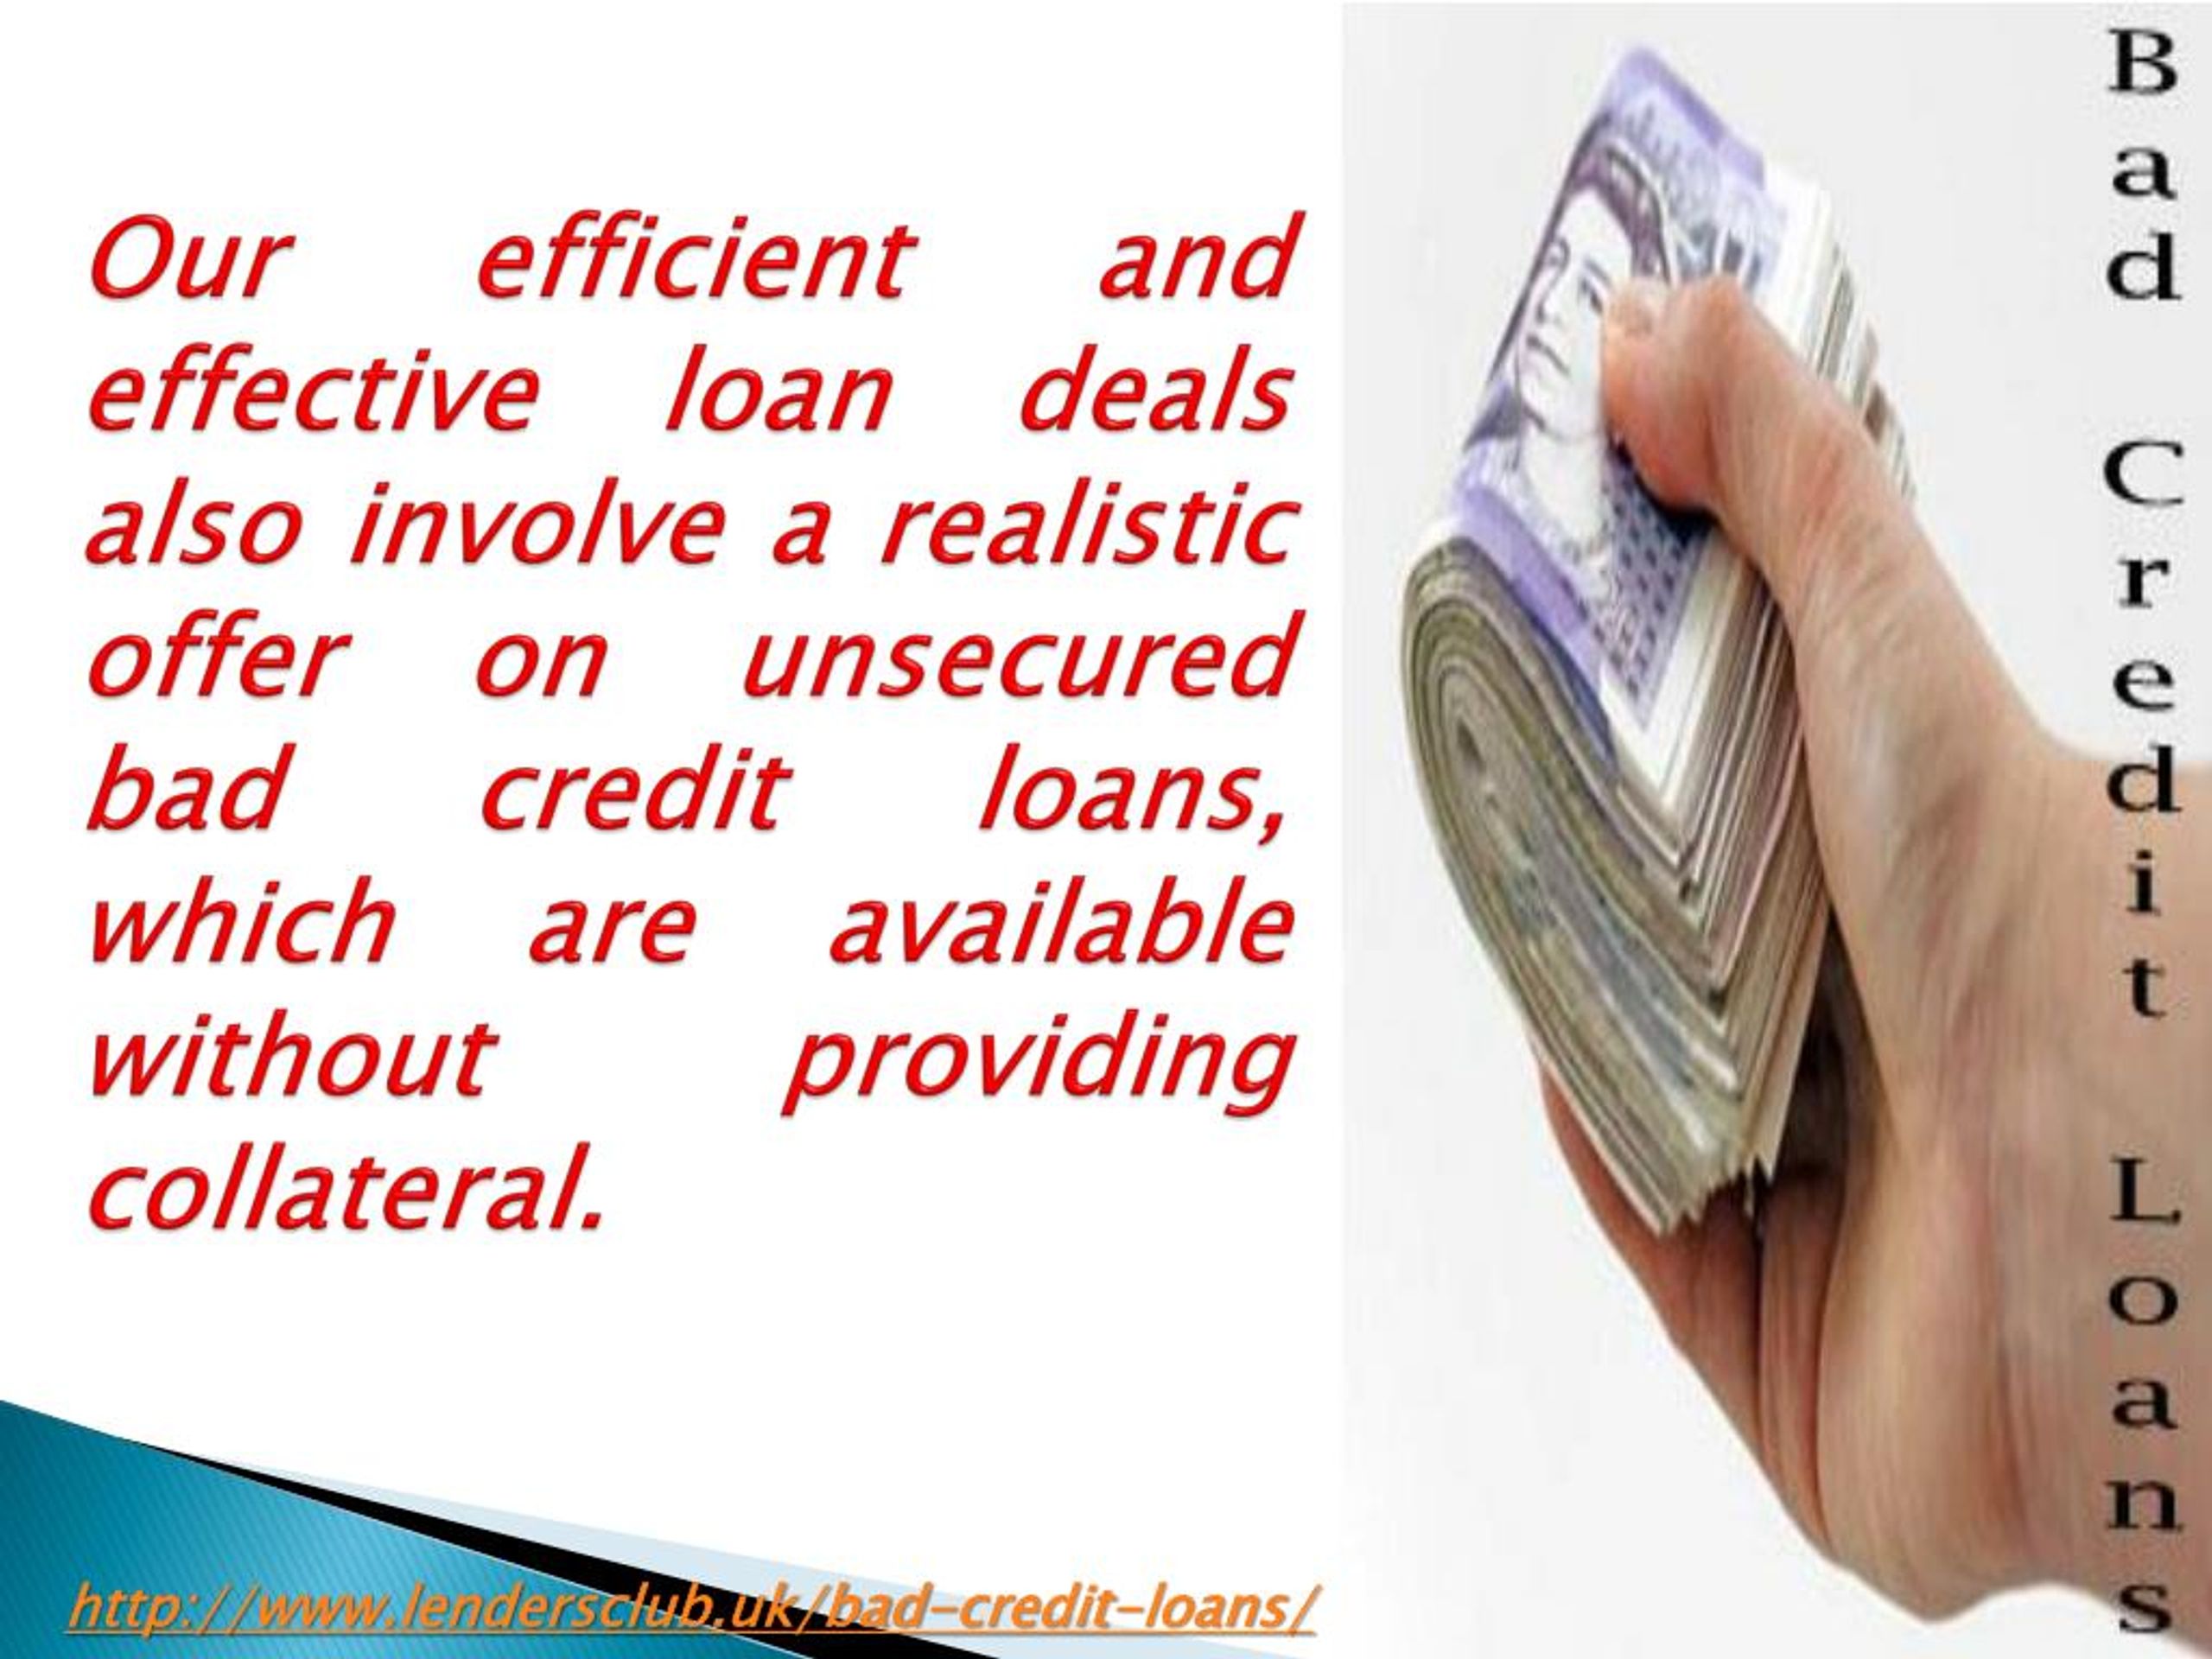 PPT Bad Credit Loans for Unemployed People in the UK